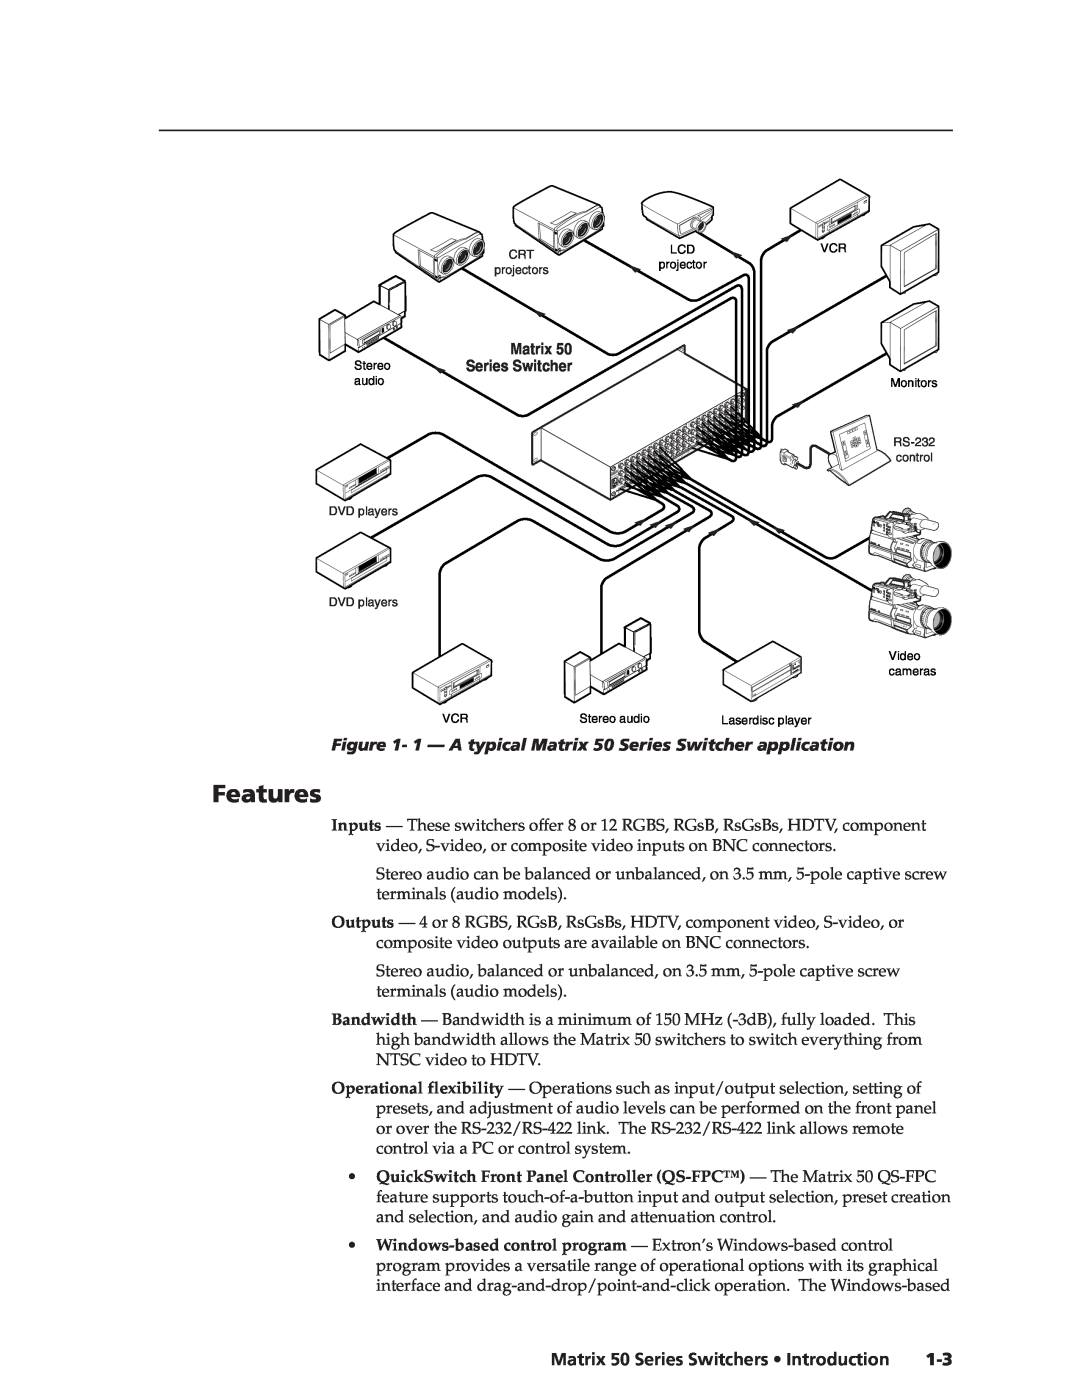 Extron electronic manual Features, 1 - A typical Matrix 50 Series Switcher application 